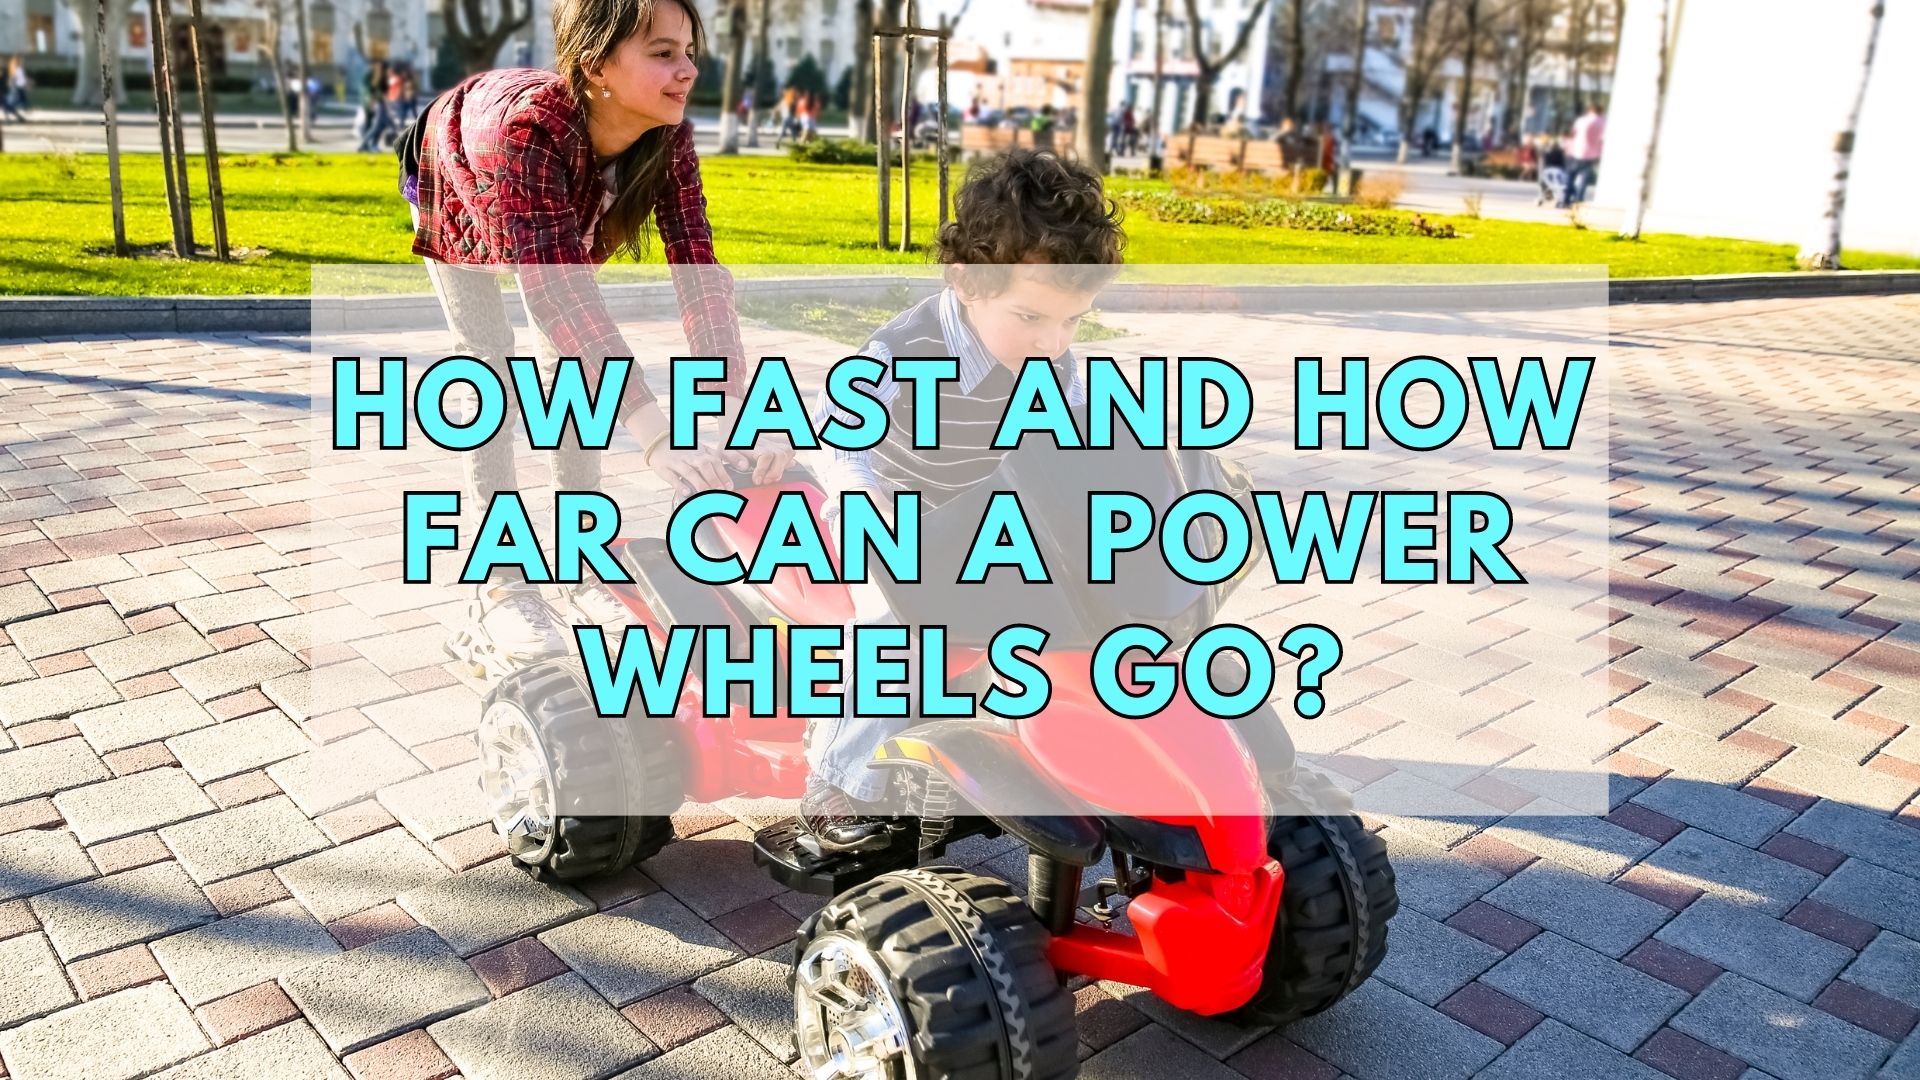 How Fast And How Far Can A Power Wheels Go